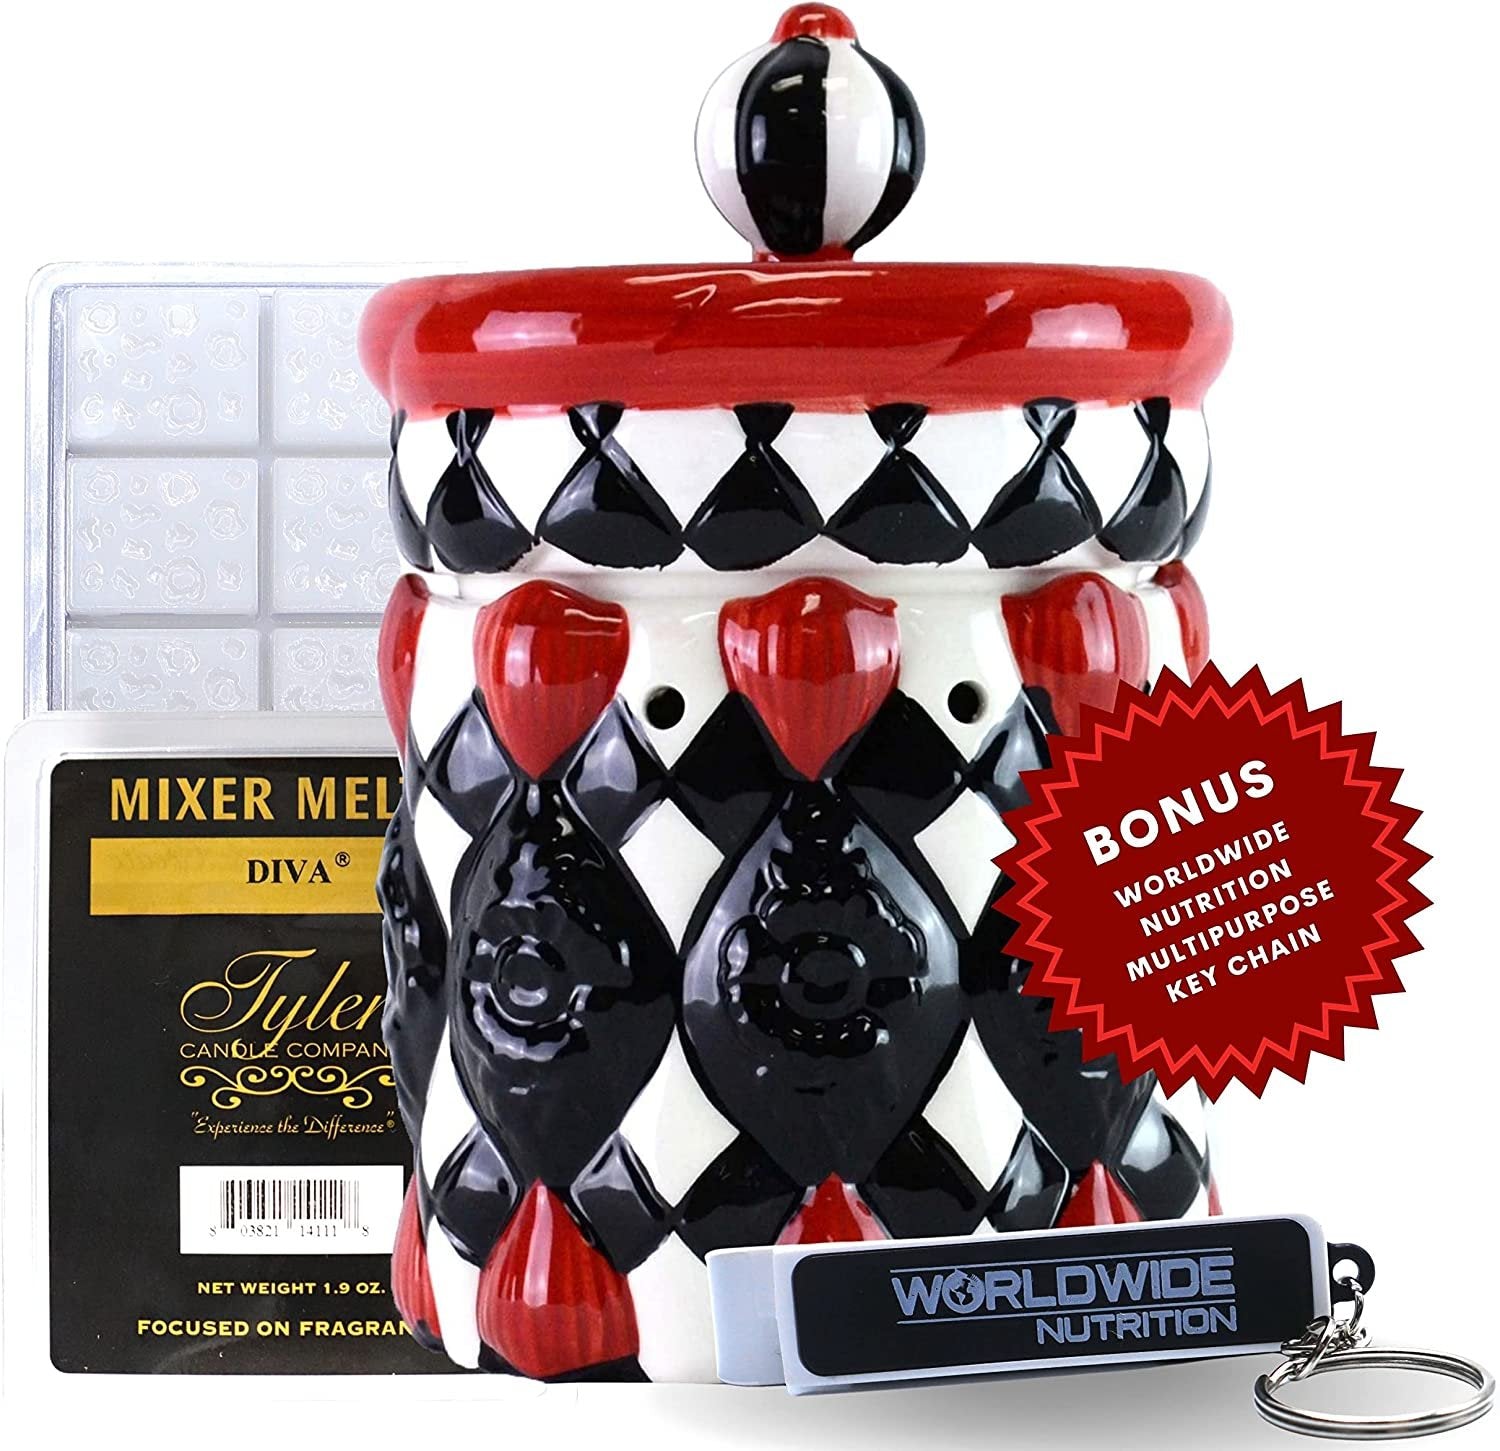 Tyler Candle Company Diva Candle Wax Melt Warmer - Home Decor Candle Accessories with Included 6 Wax Melts - Celebrity Red Radiant Fragrance Wax Warmer - 5.5 x 5" in with Bonus Key Chain